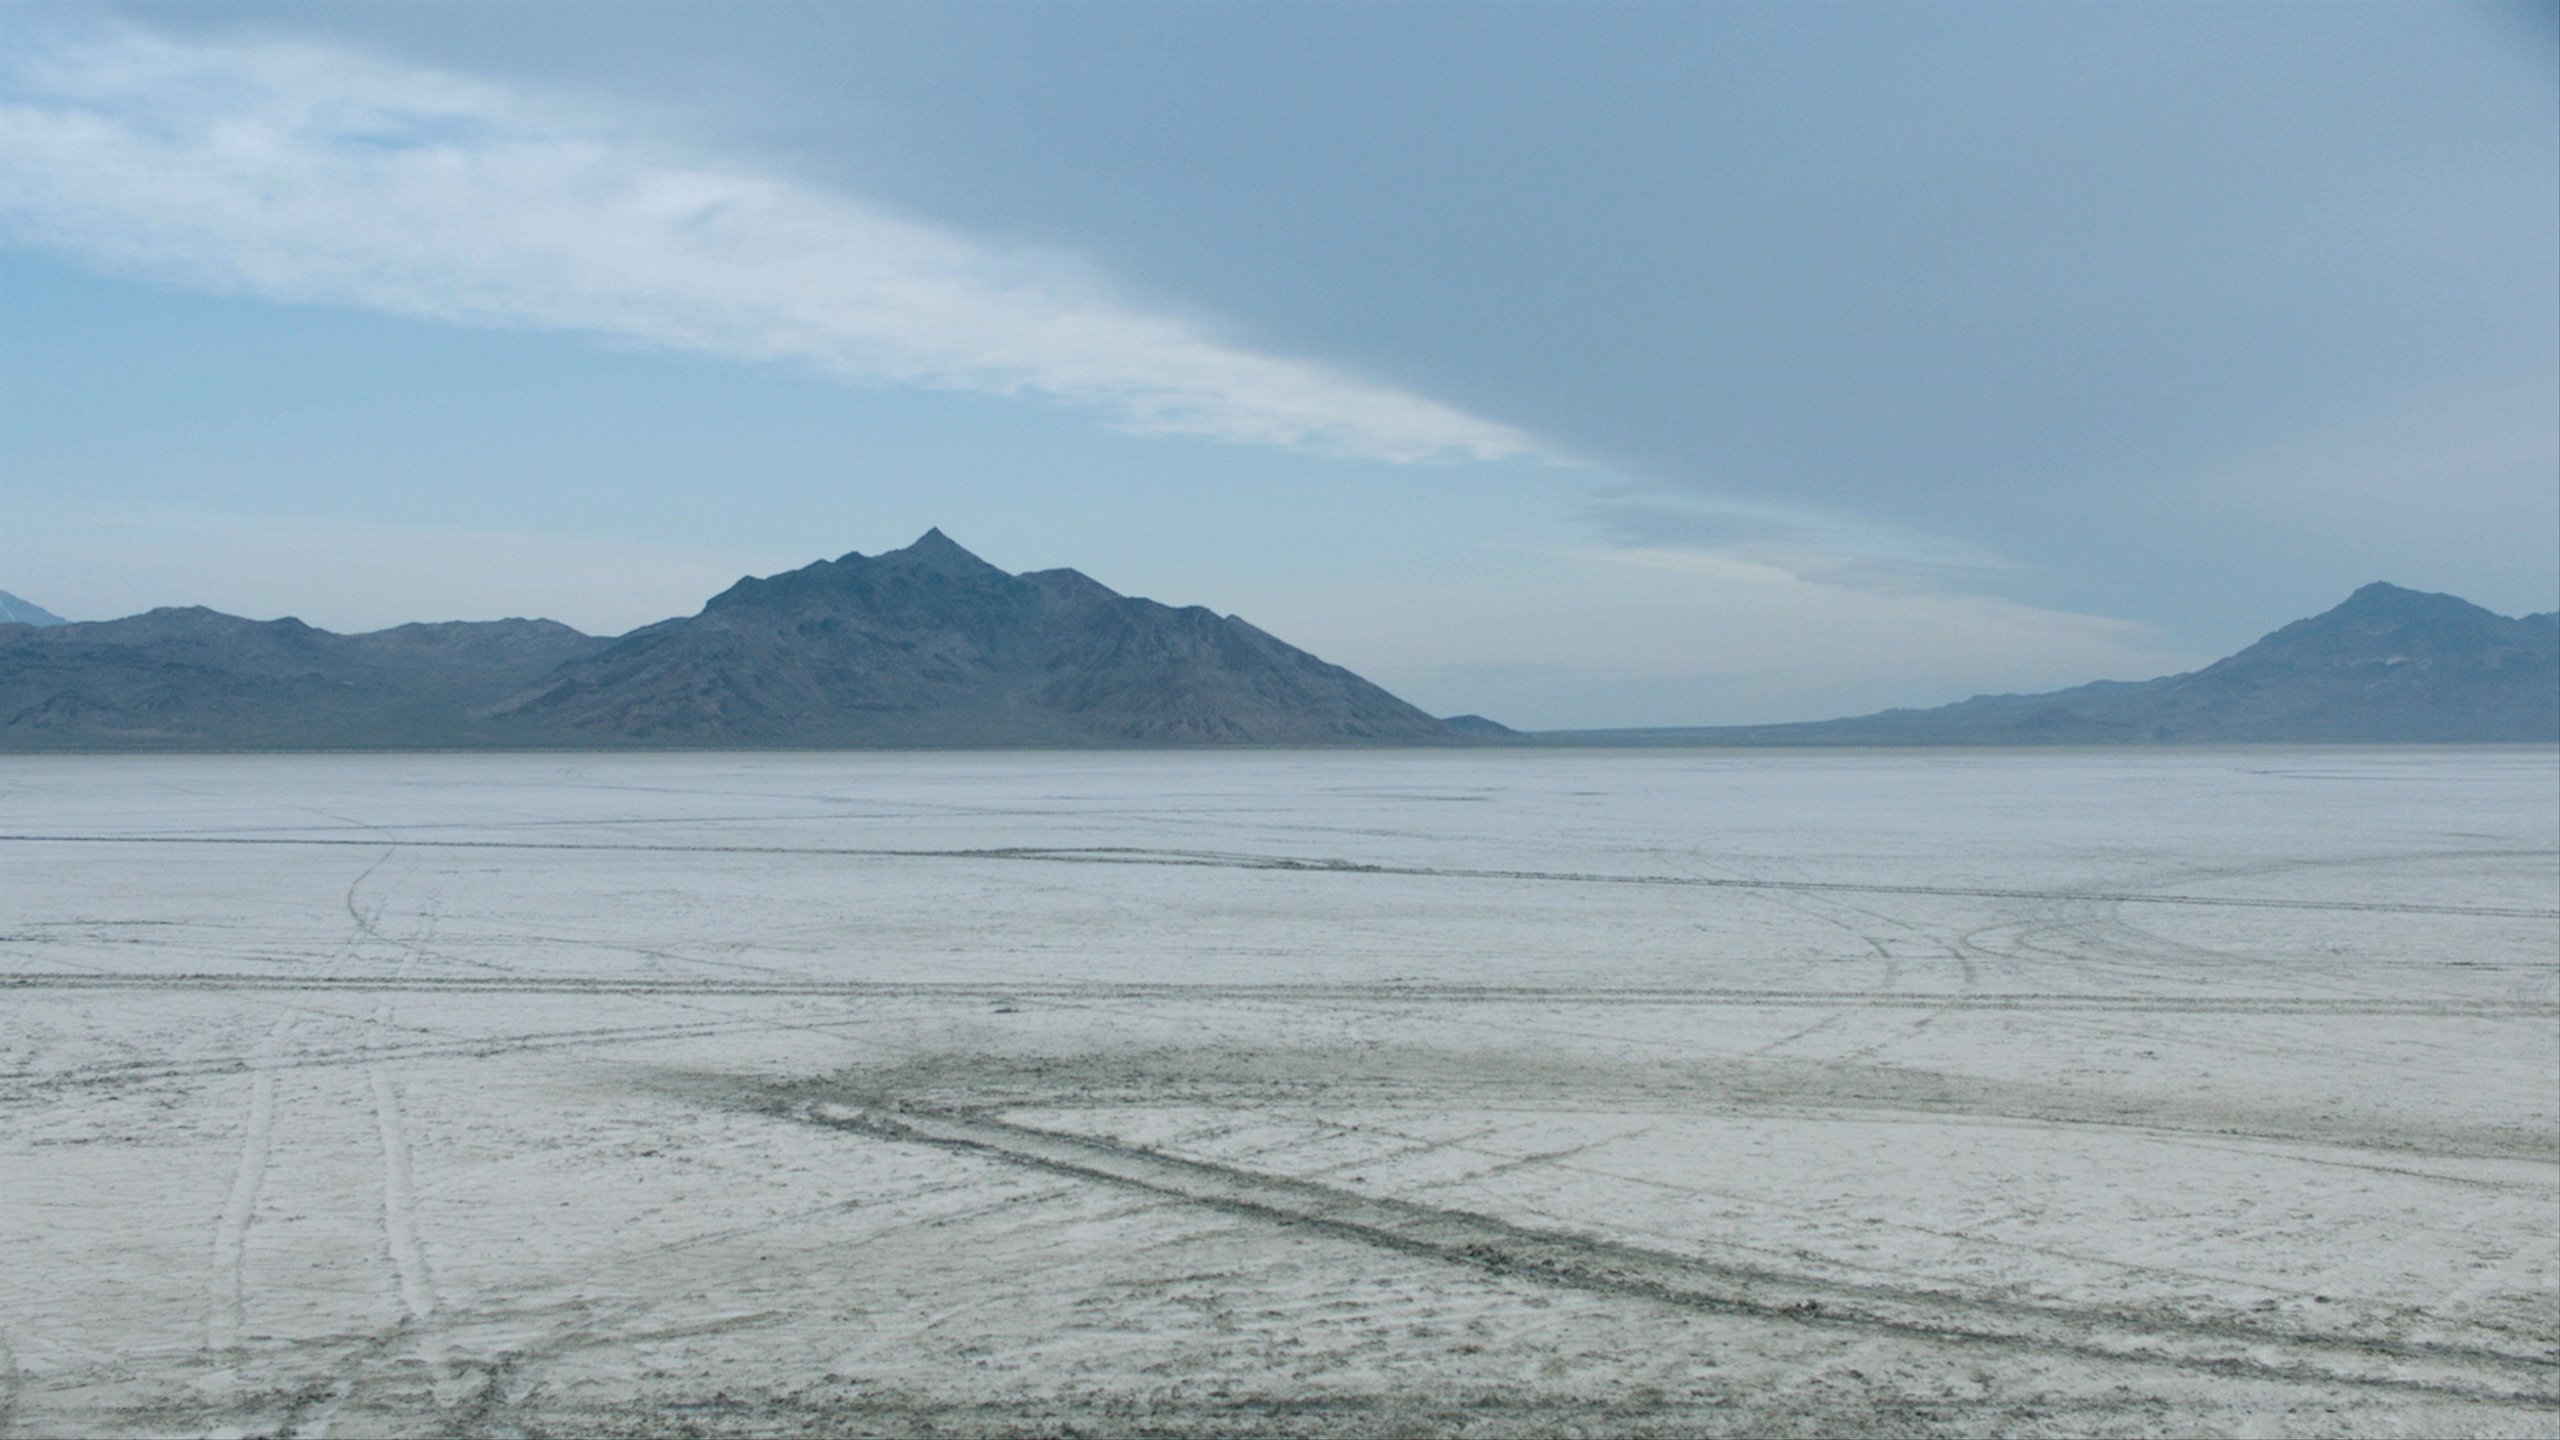 Land Rover driving across salt flats with mountains in the background